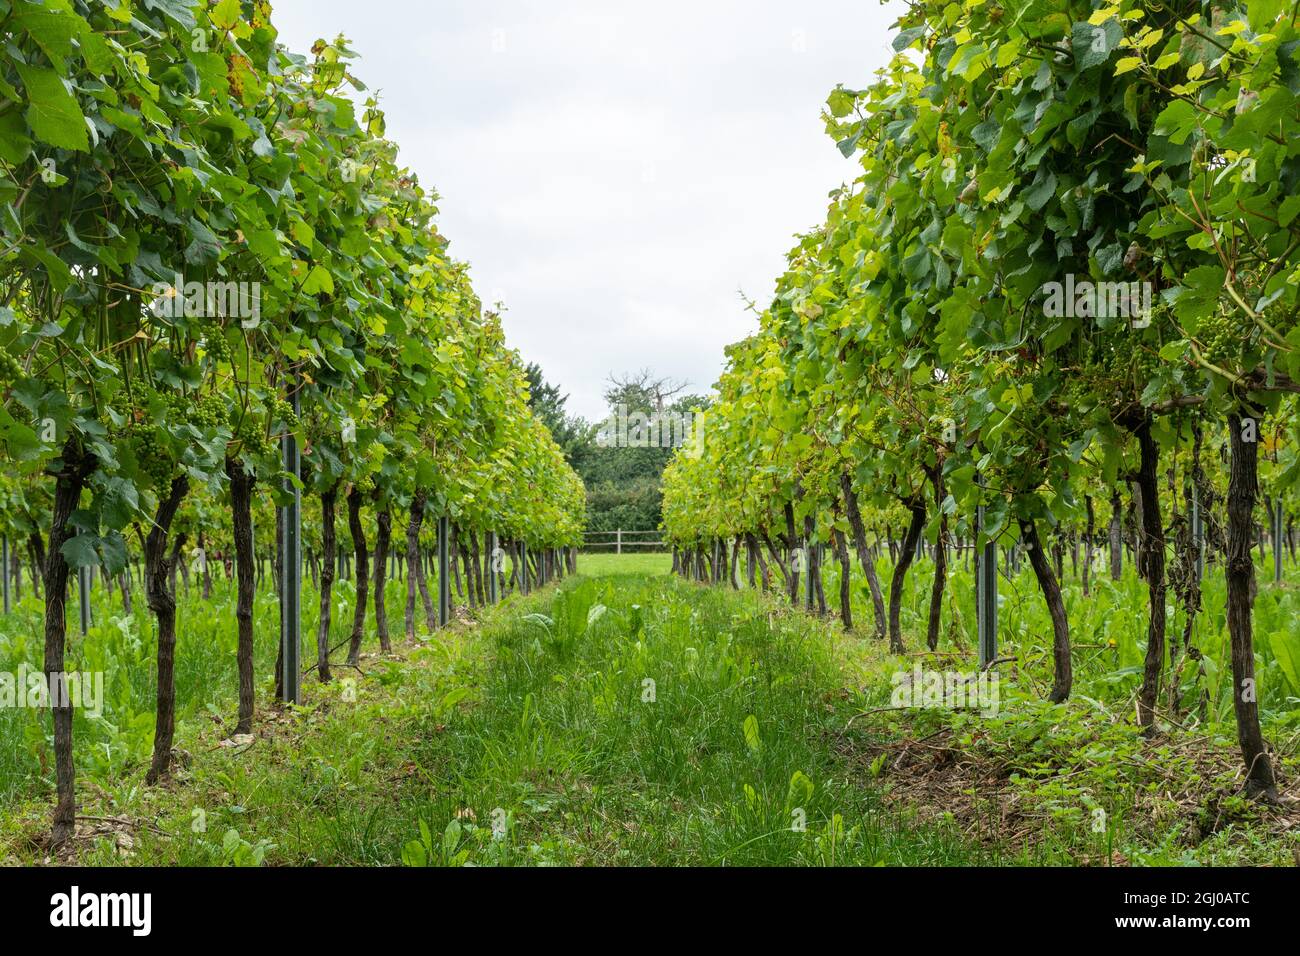 Rows of grape vines on the Tinwood Estate Vineyard in West Sussex, England, UK. Stock Photo